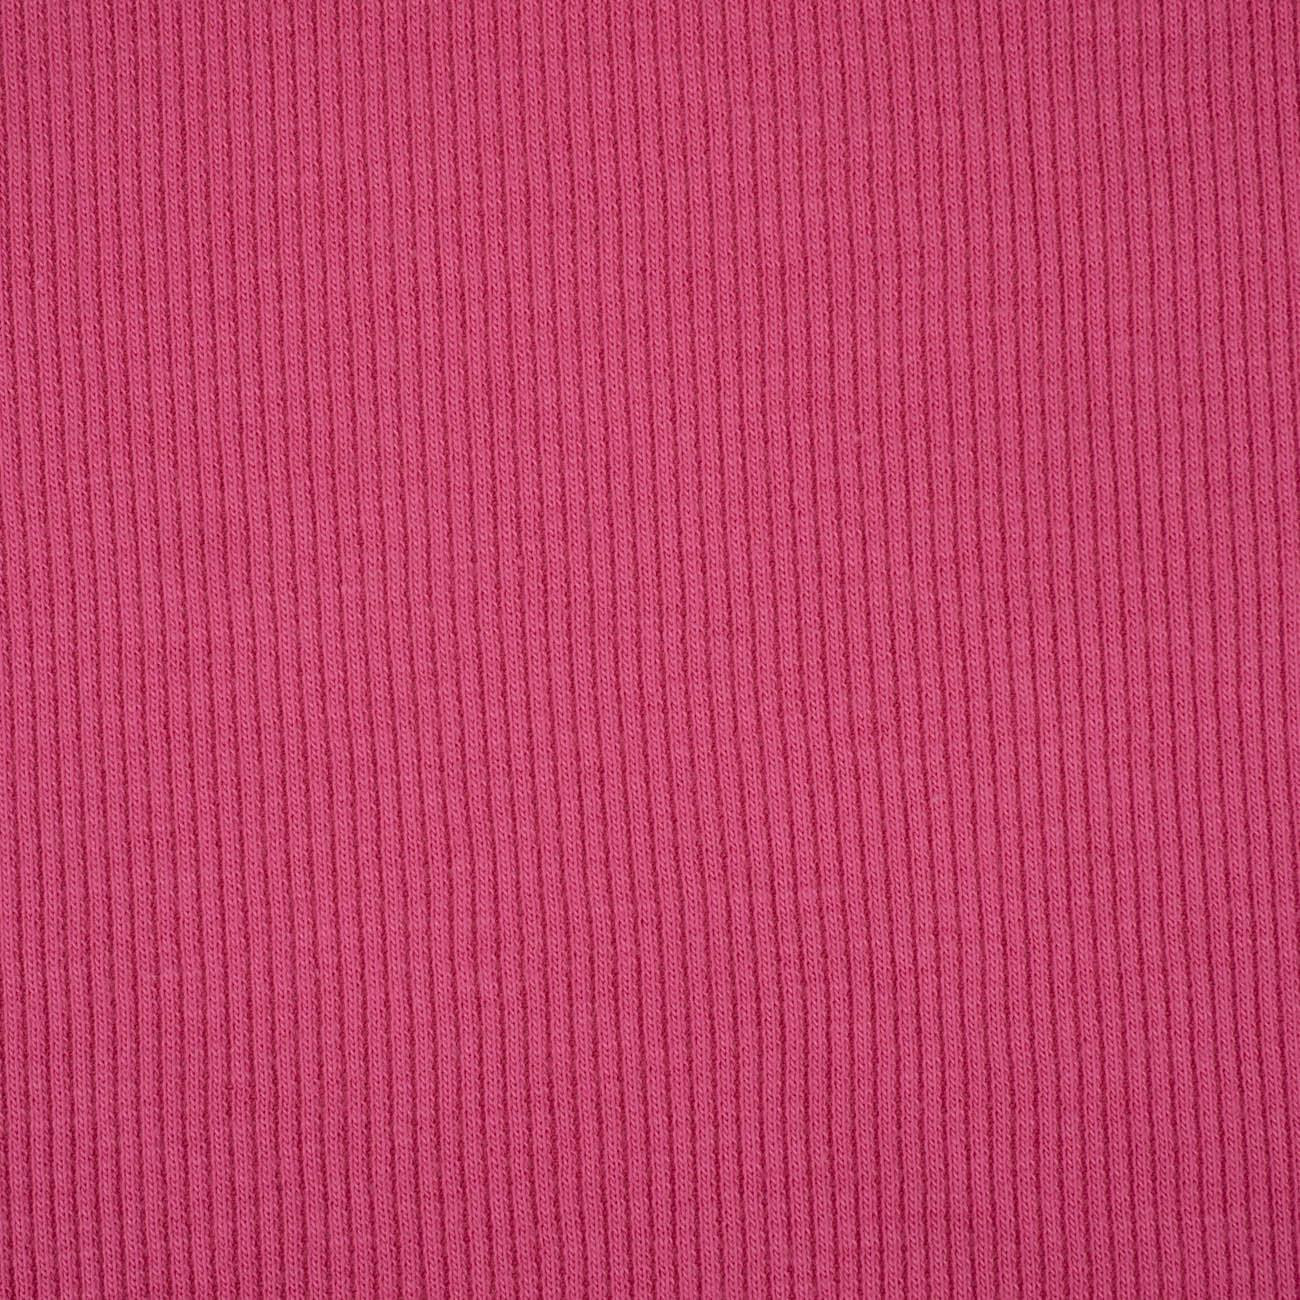 D-04 PINK - Ribbed knit fabric